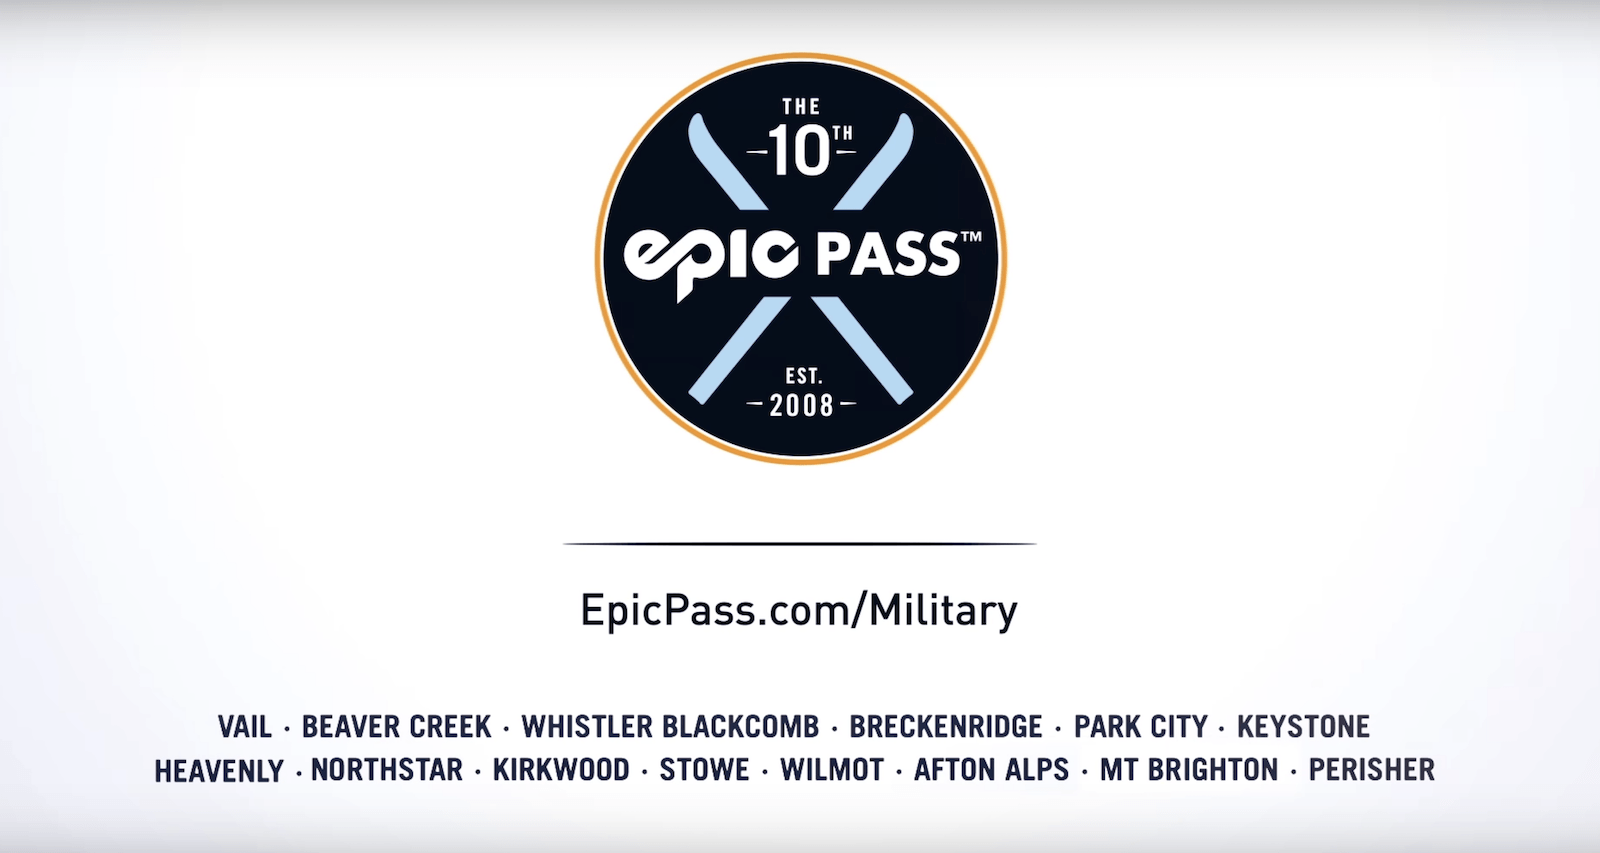 Epic Pass Logo - Vail Resorts Introduces $99 Military Epic Pass for the 2018-19 ...